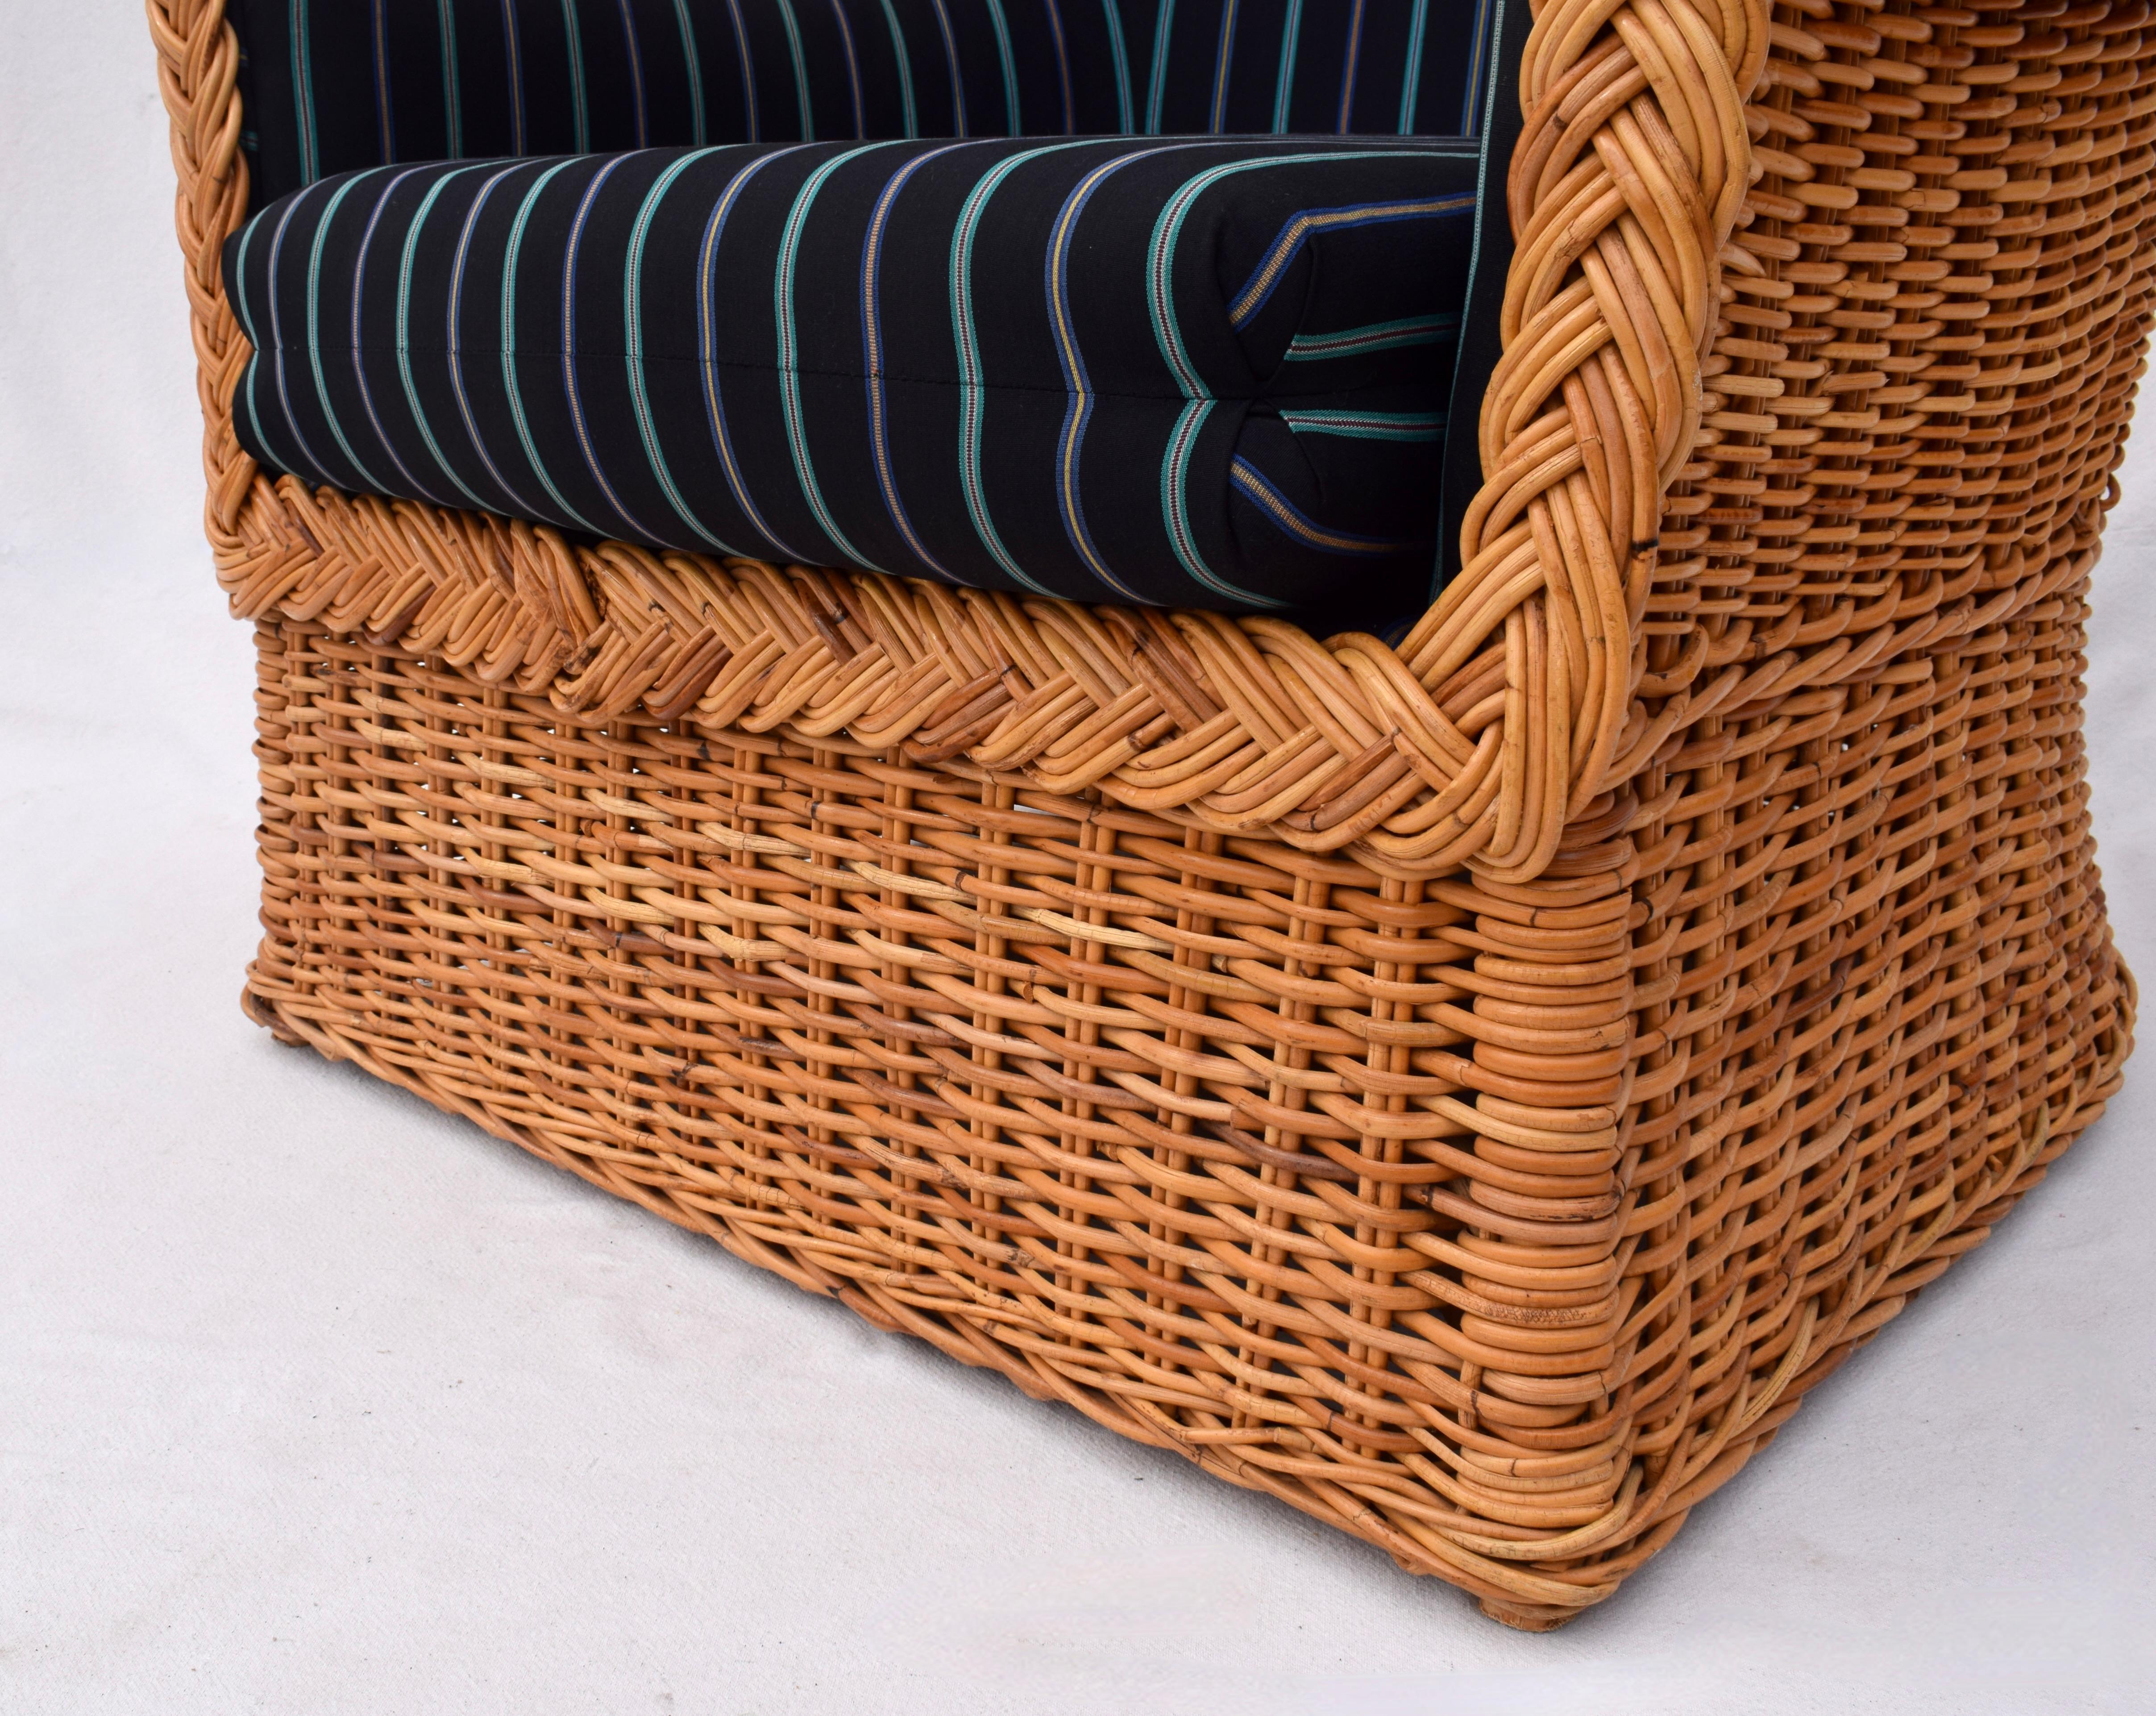 1980's Wicker Works Braided Rattan Club Chairs, Pair For Sale 1